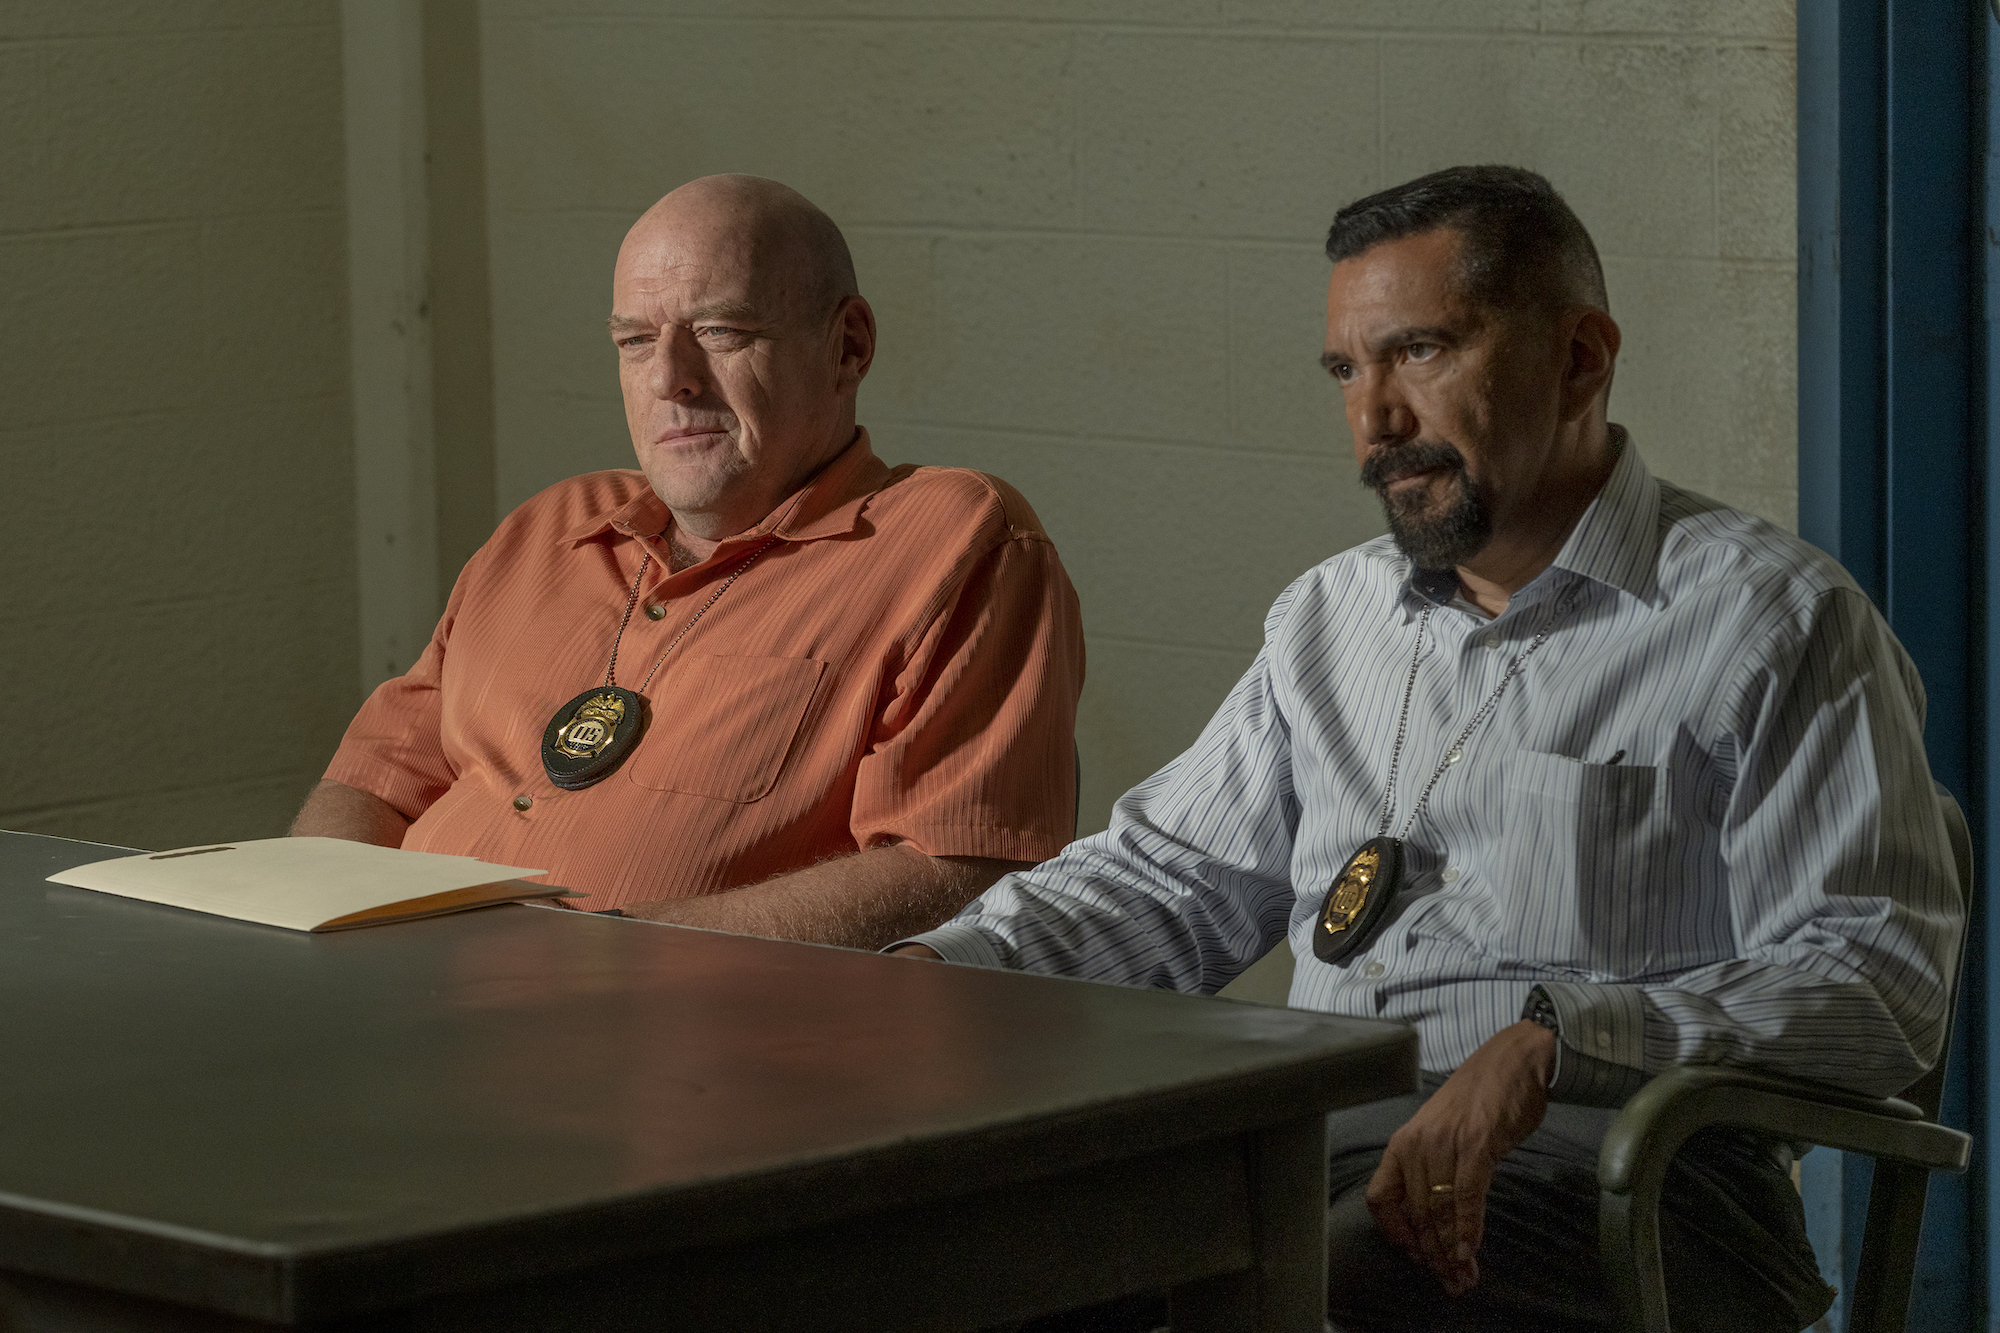 Better Call Saul: Hank and Gomez sit in an interrogation room